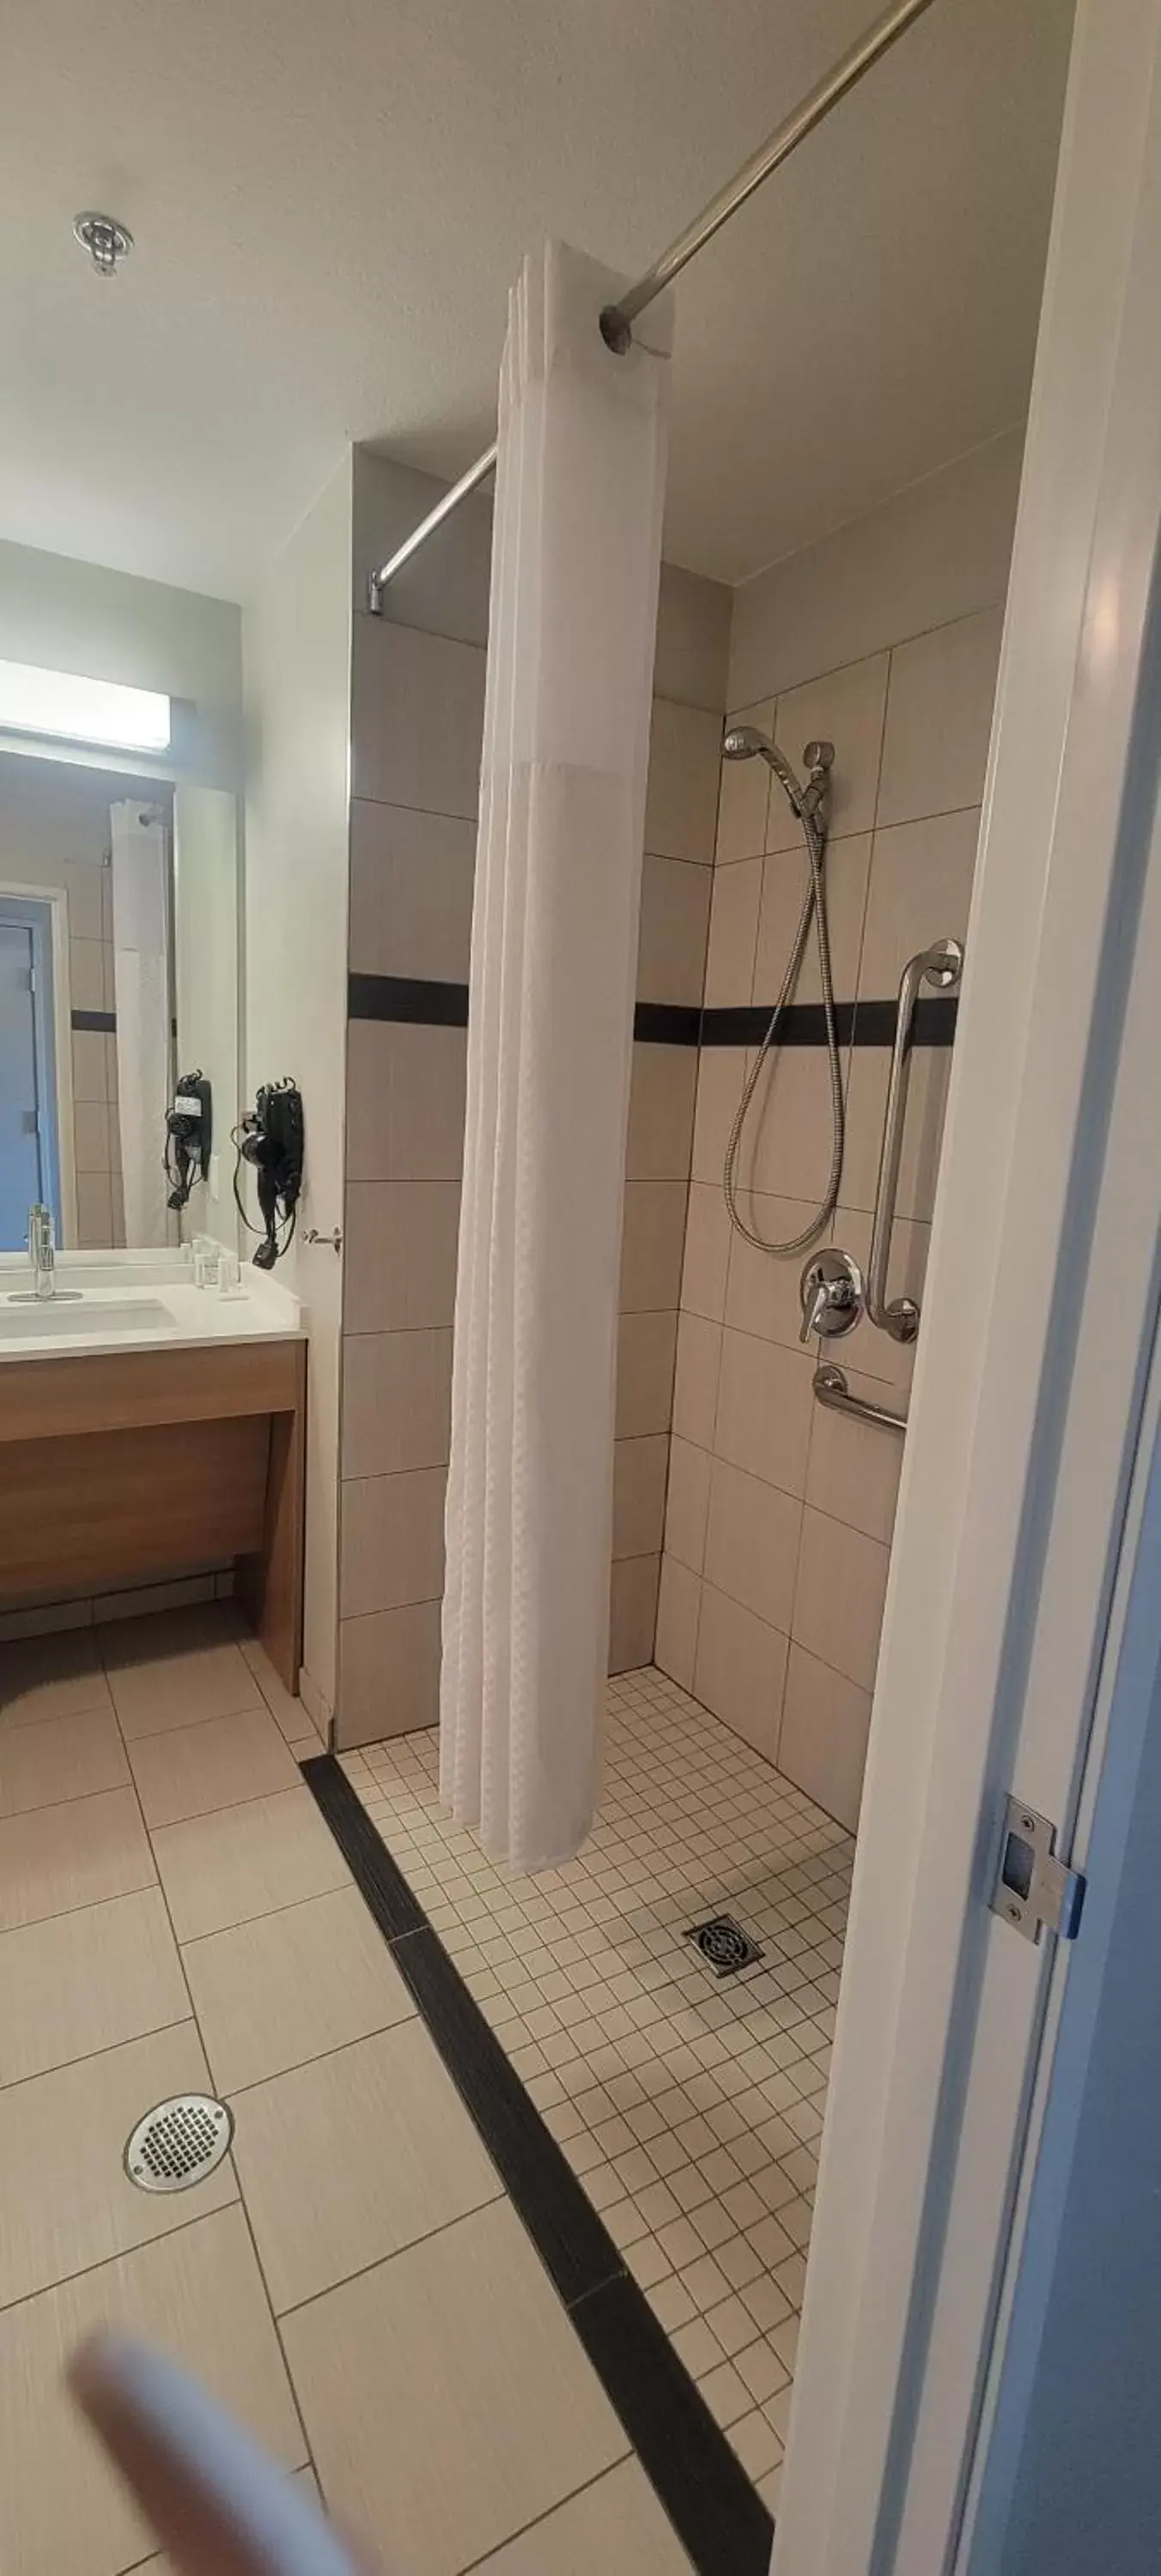 Shower, Bathroom in Microtel Inn & Suites by Wyndham Fountain North